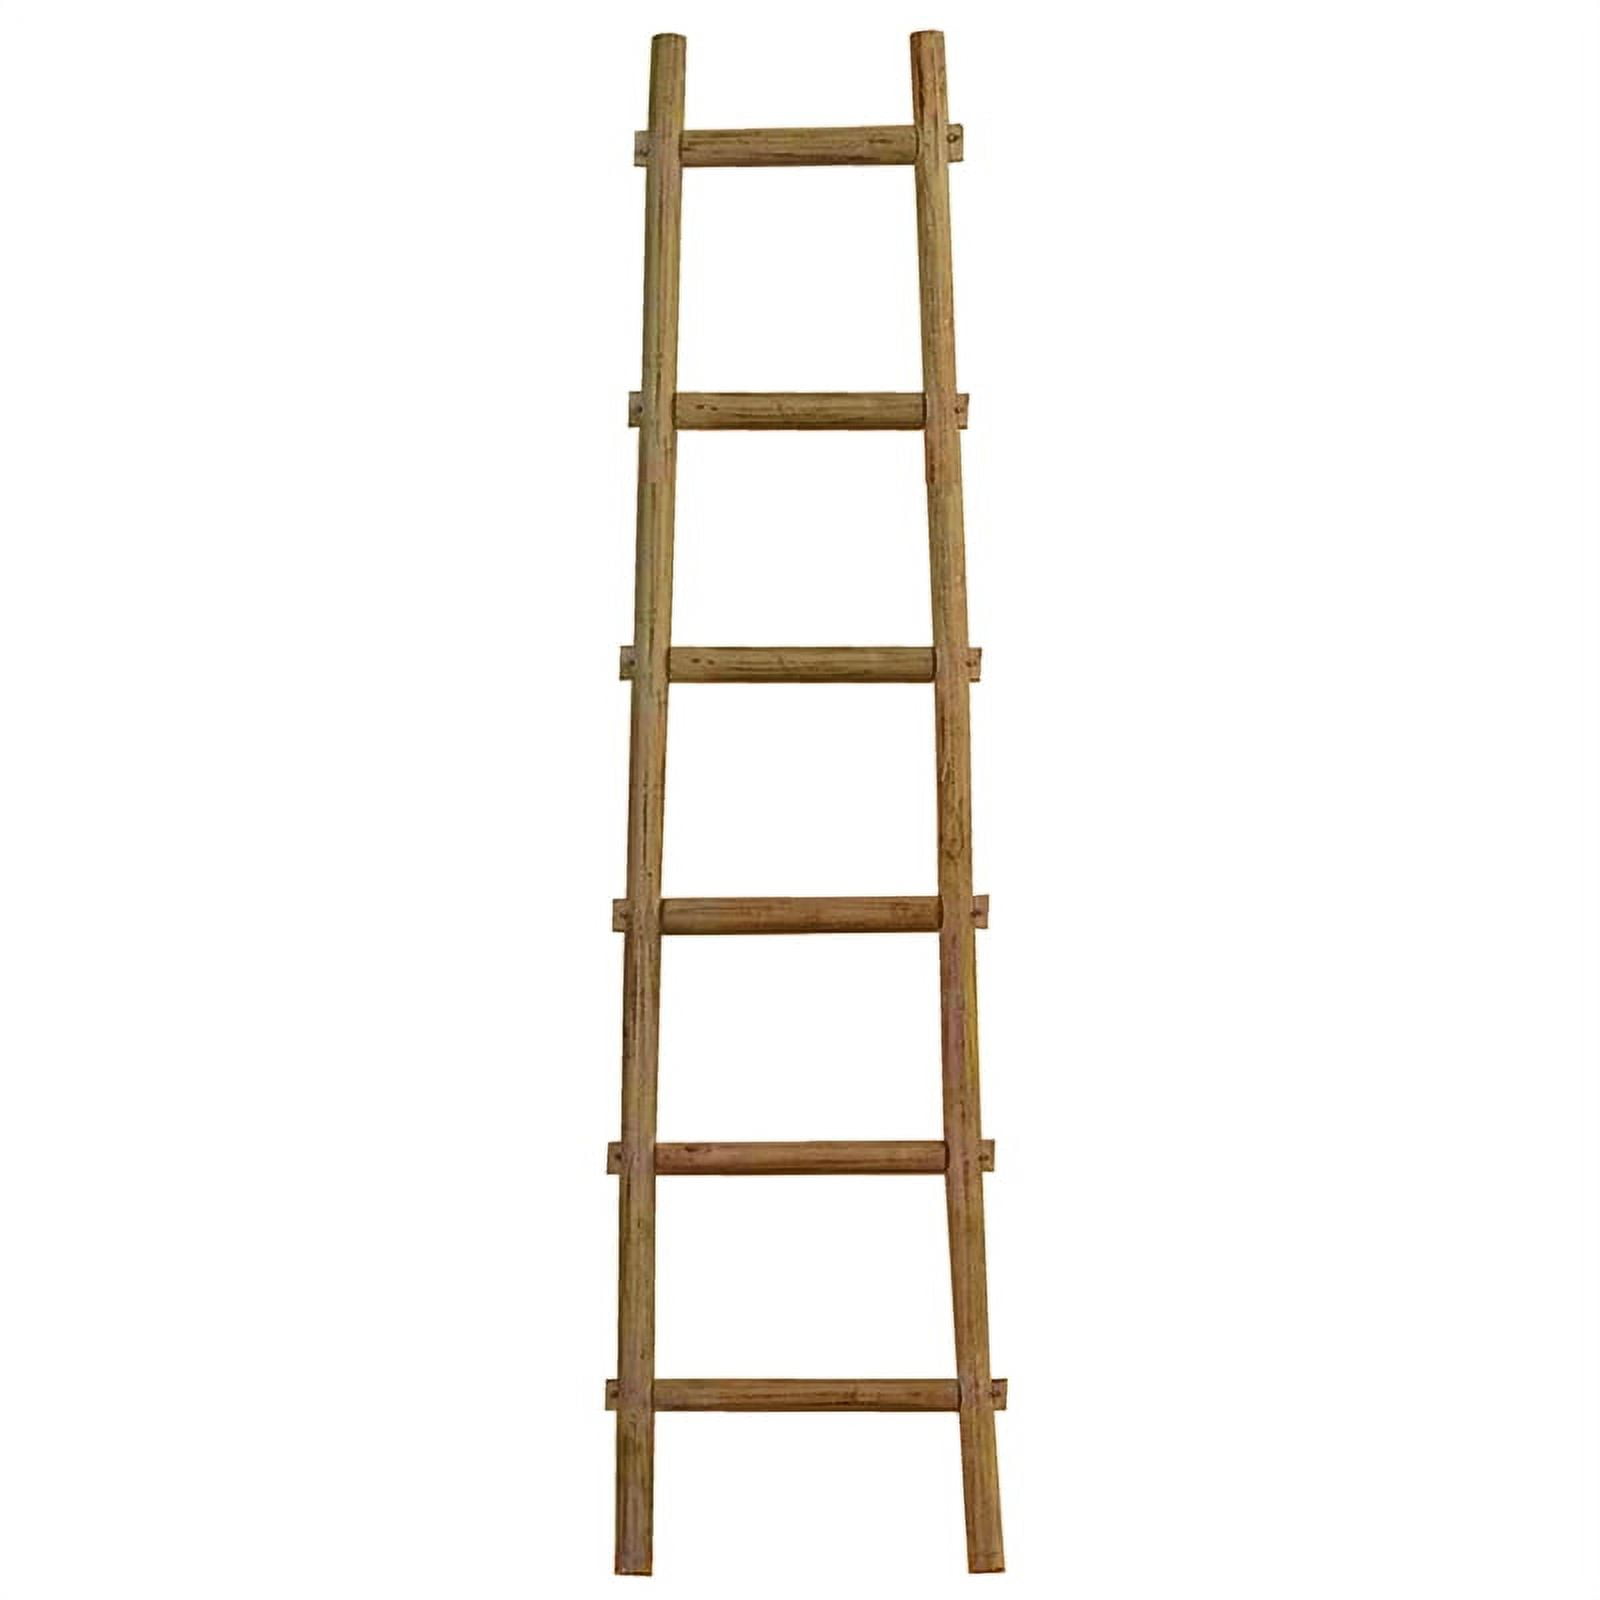 Bm210392 2 X 72 X 18 In. Transitional Style Wooden Decor Ladder With 6 Steps, Brown